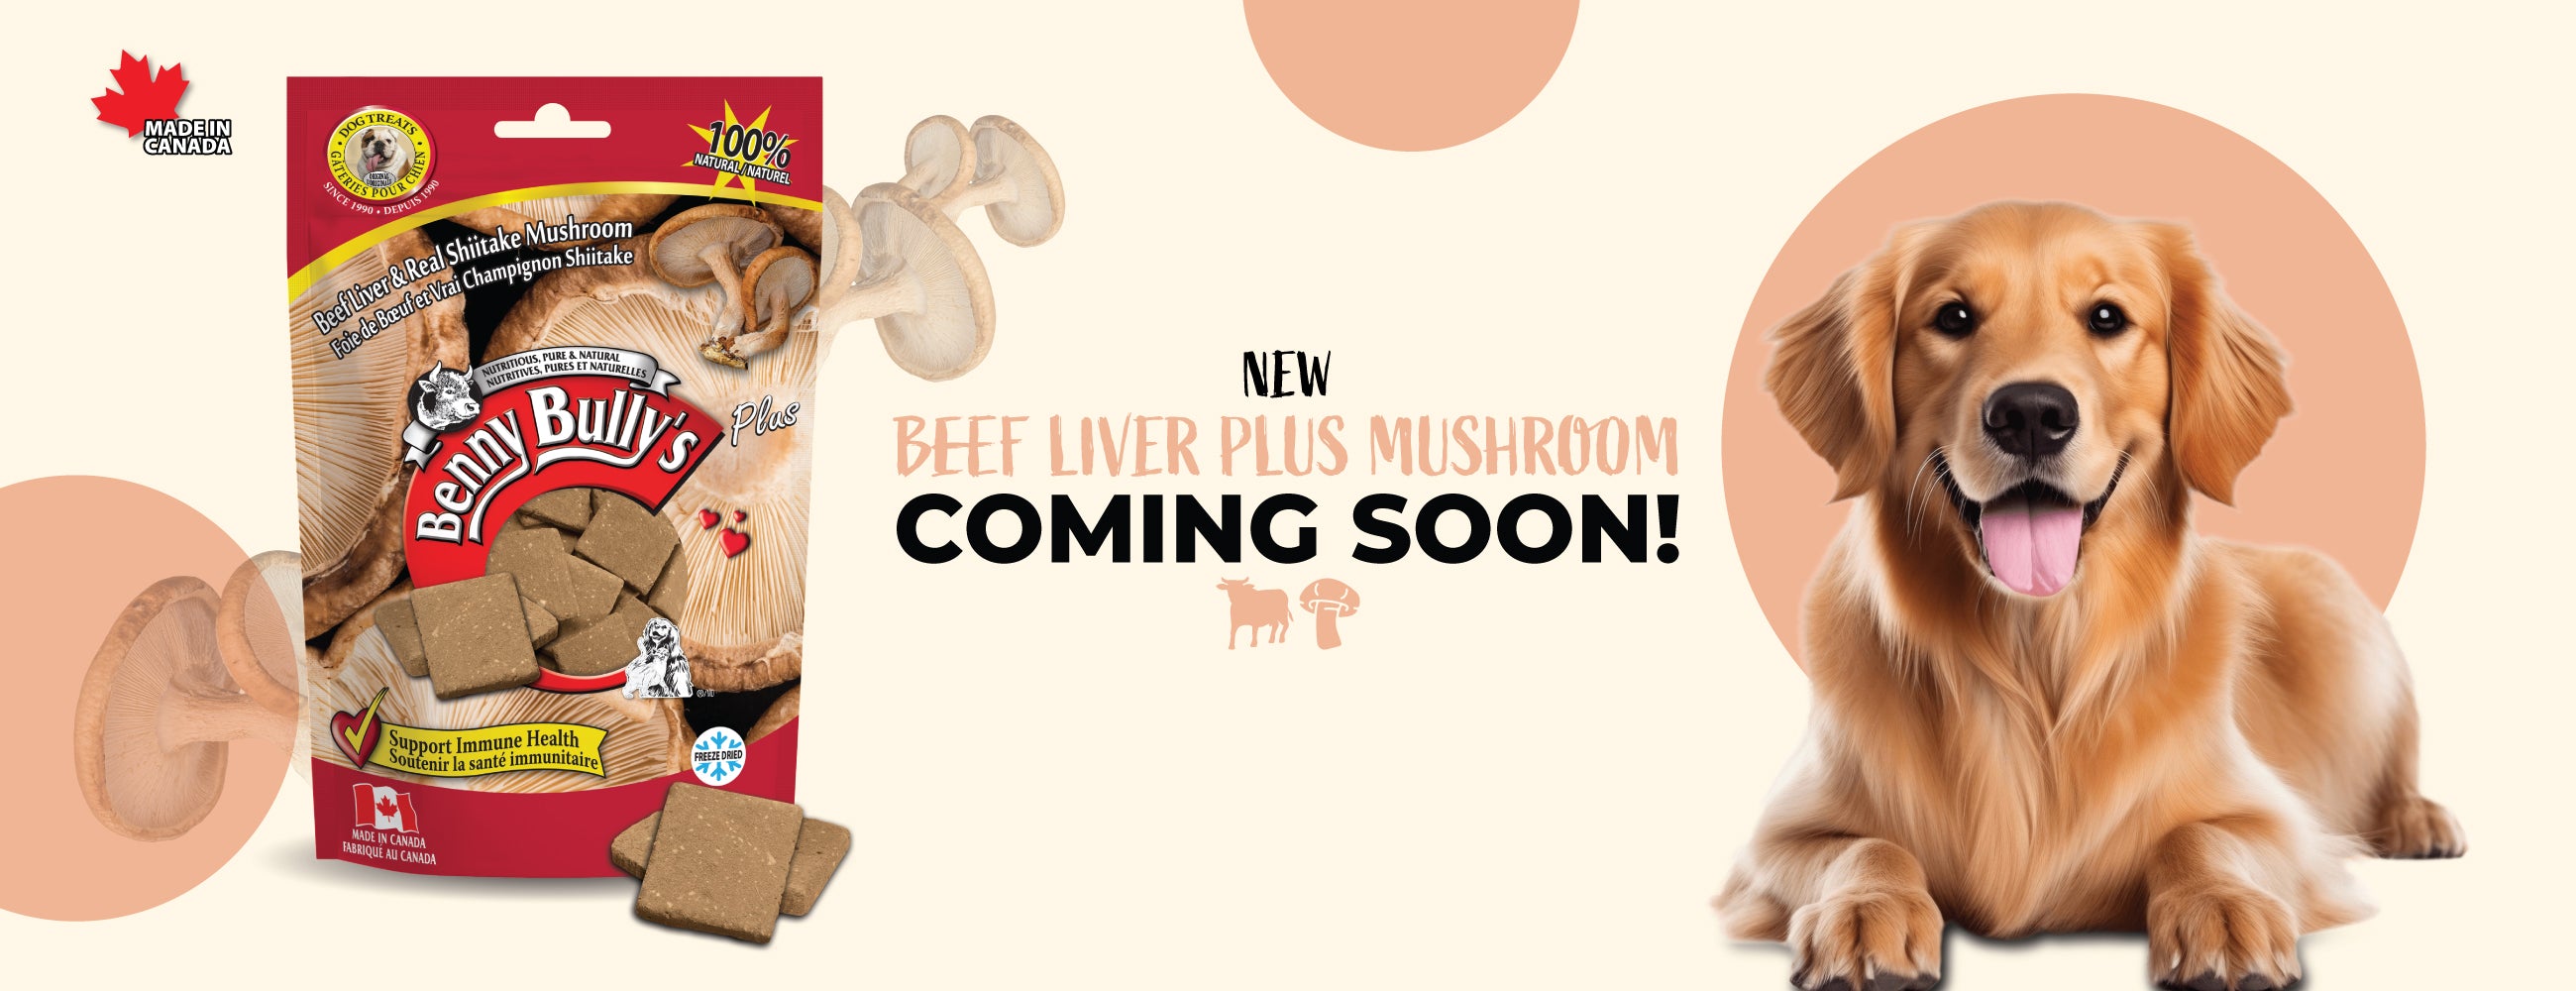 new pure turkey and beef liver plus shiitake mushroom dog treats pouches with a happy dog on orange and beige background